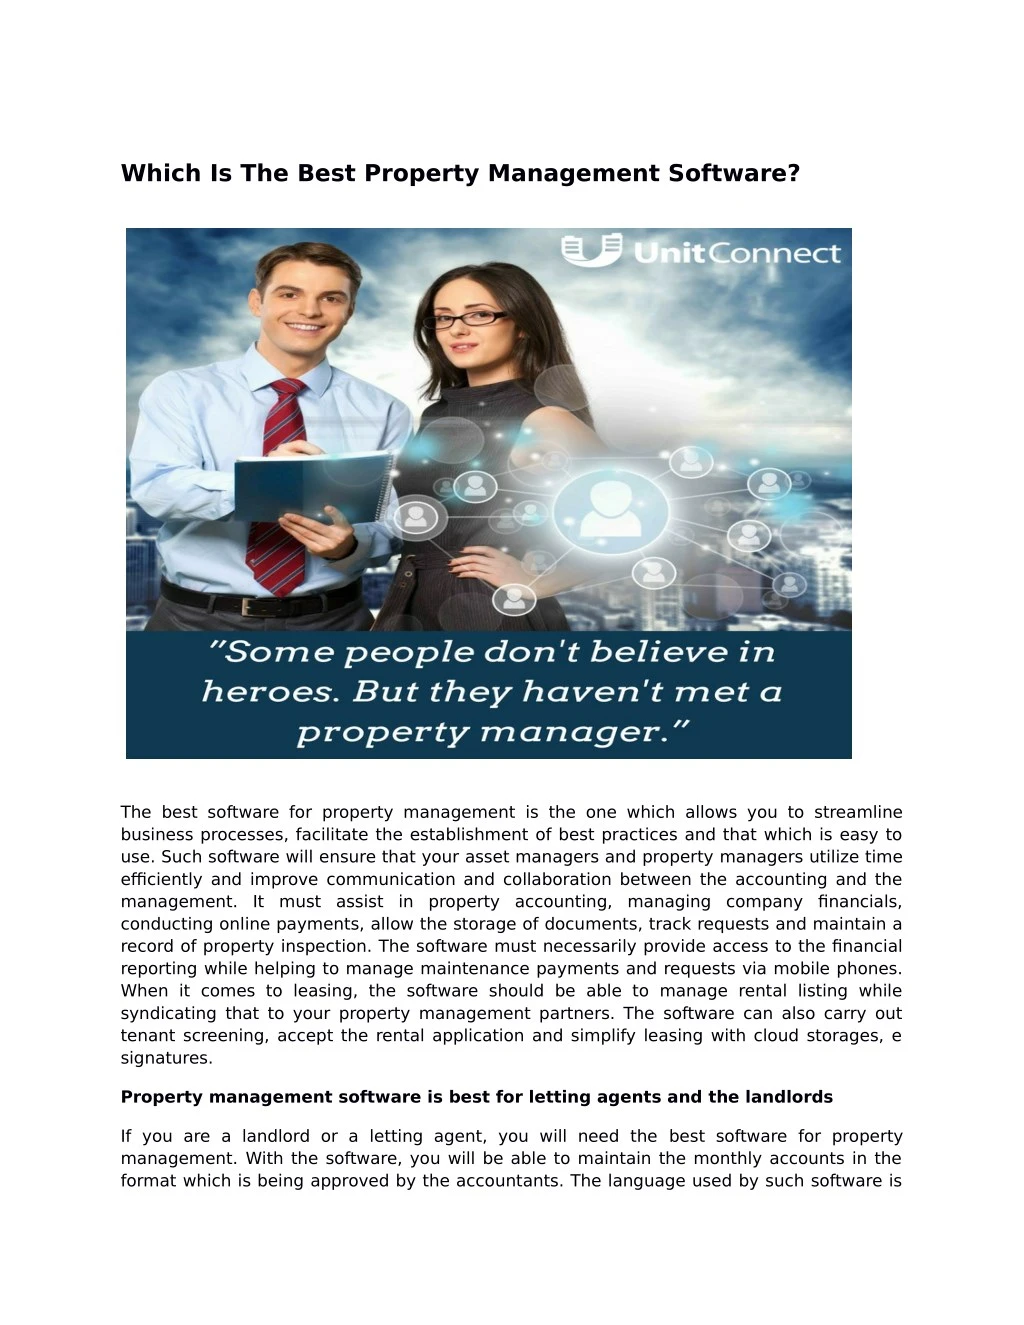 which is the best property management software